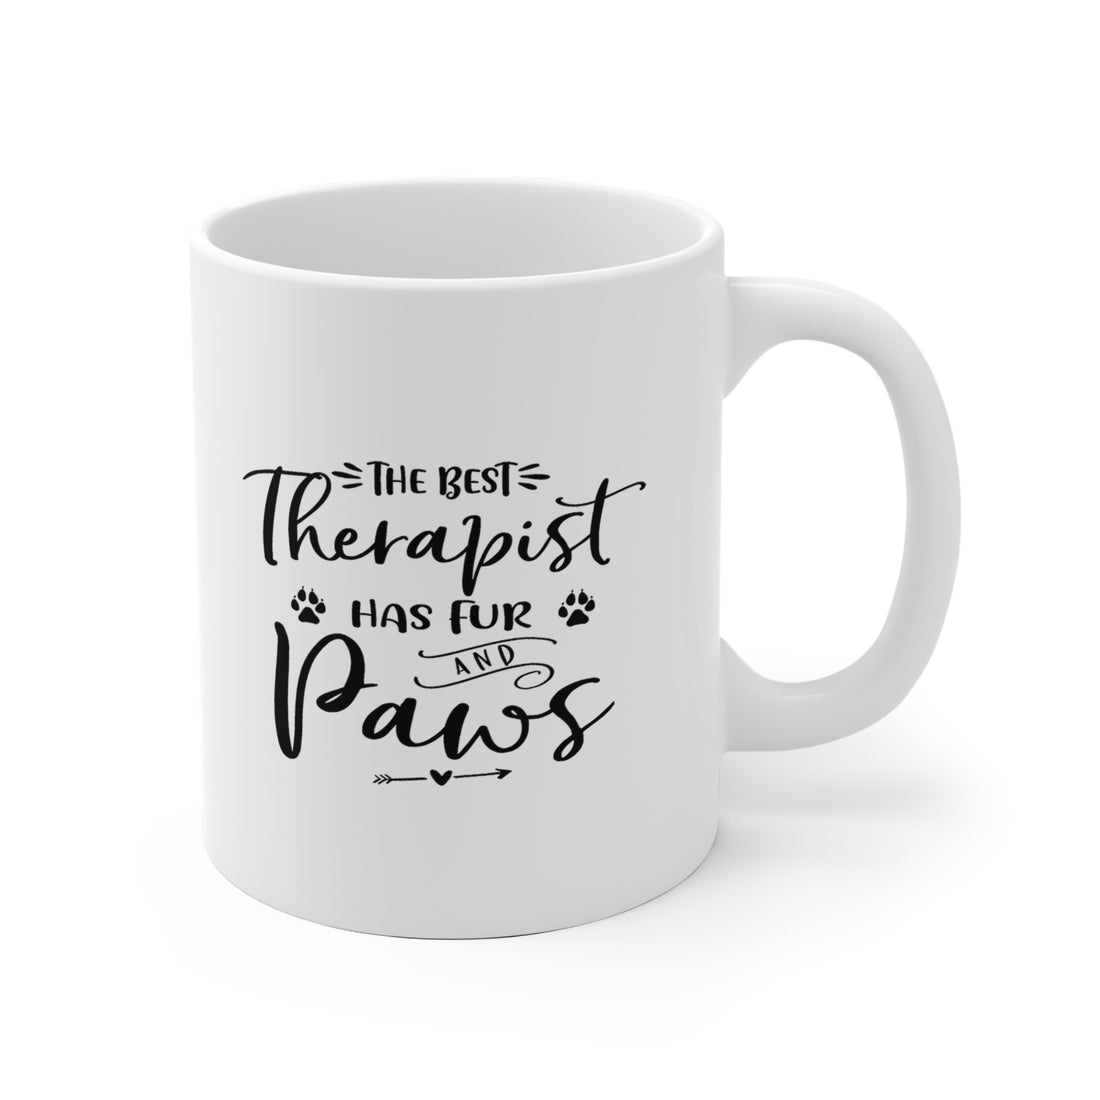 The Best Therapist Has Fur &amp; Paws - White Ceramic Mug 2 sizes Available